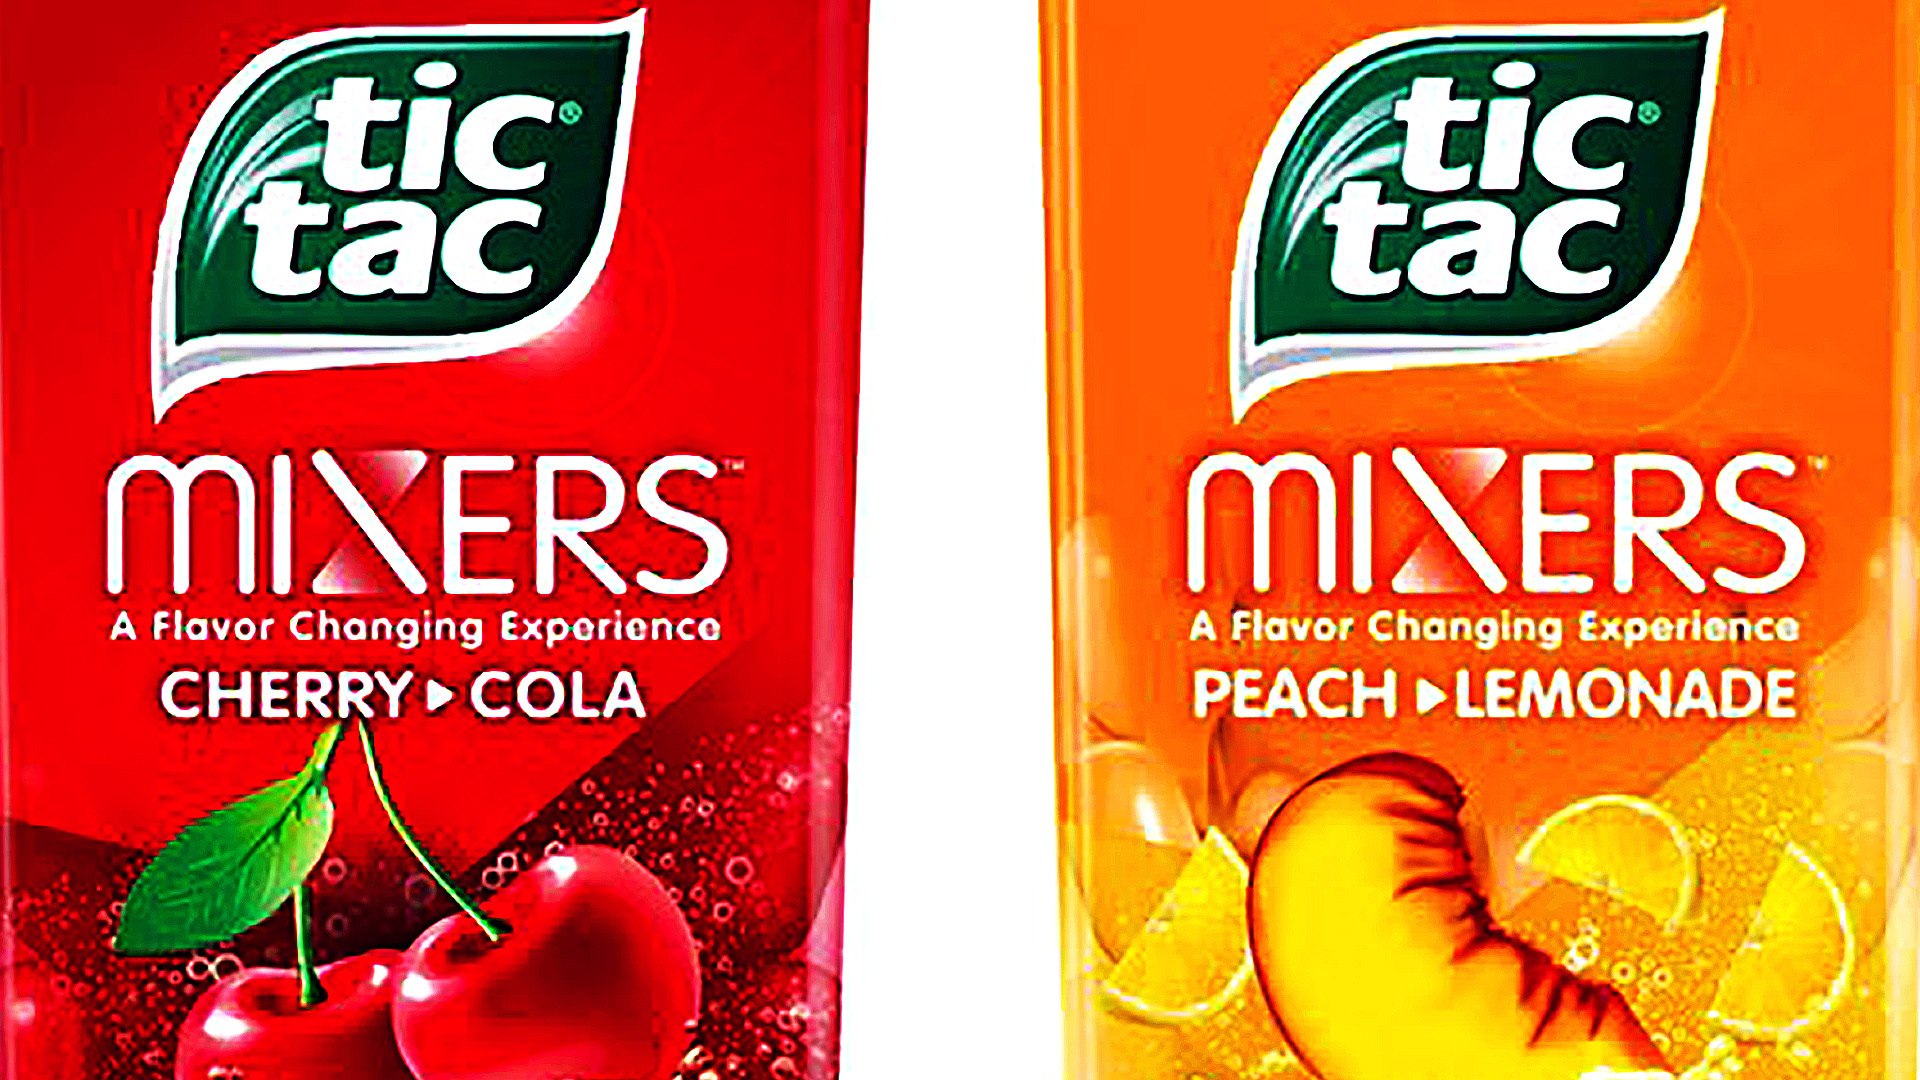 Tic Tac's Newest Product, Tic Tac Mixers Change Flavors While You Eat Them  - video Dailymotion